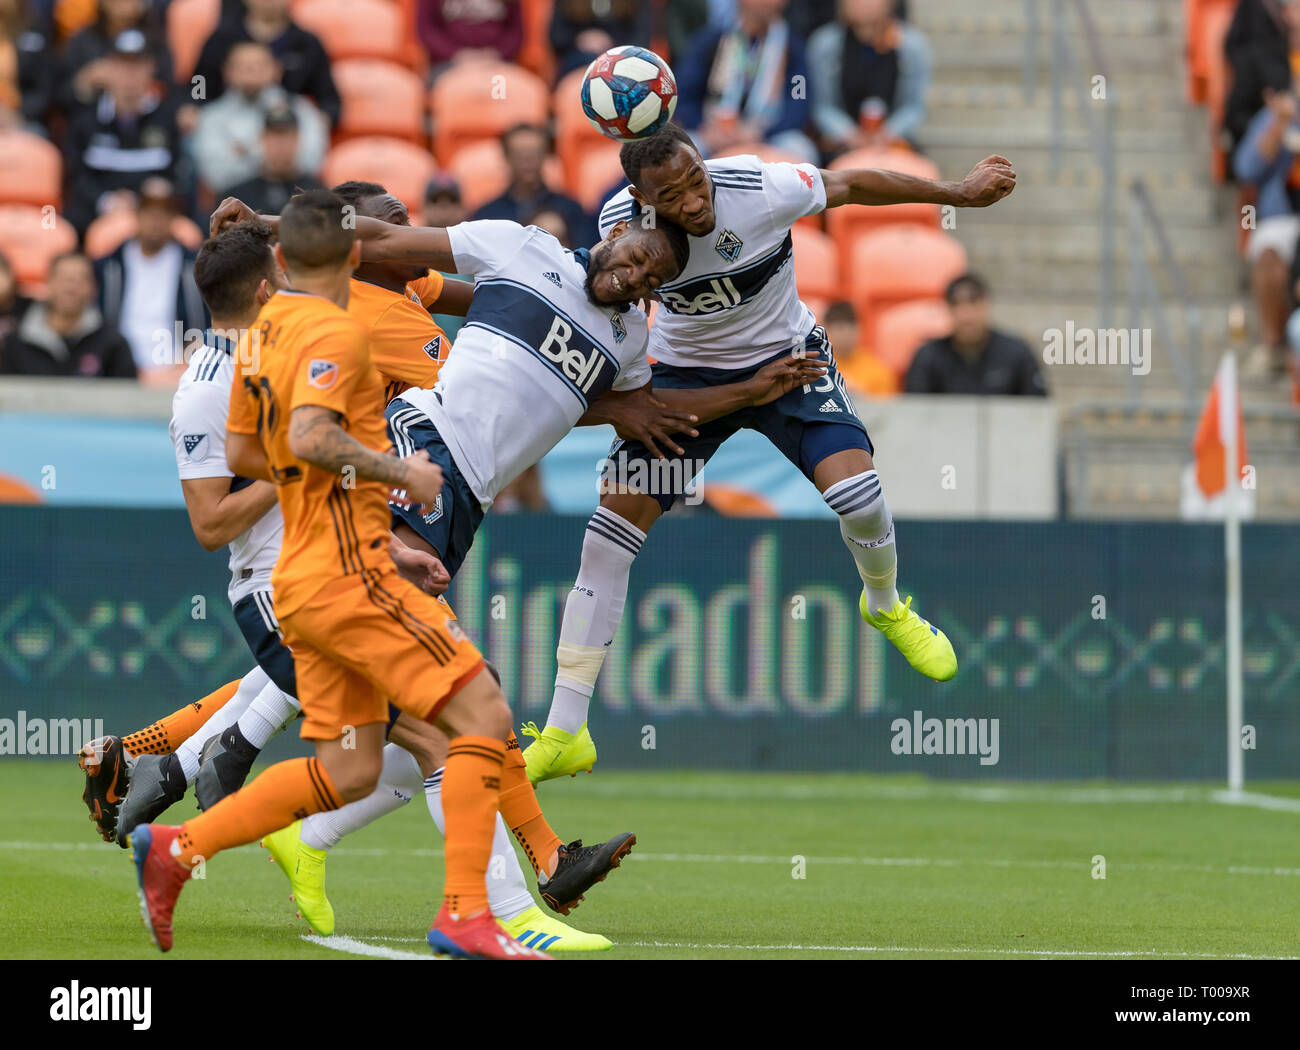 Compass Stadium, Houston, Texas, USA. March 16, 2019: Vancouver Whitecaps defender Derek Cornelius (13) and forward Alhassane Bangoura (19) go up for the header in front of the goal during the match between the Vancouver Whitecaps FC and the Houston Dynamo at BBVA Compass Stadium in Houston, Texas The score at the half Dynamo is in the lead 2-1 © Maria Lysaker/CSM. Stock Photo